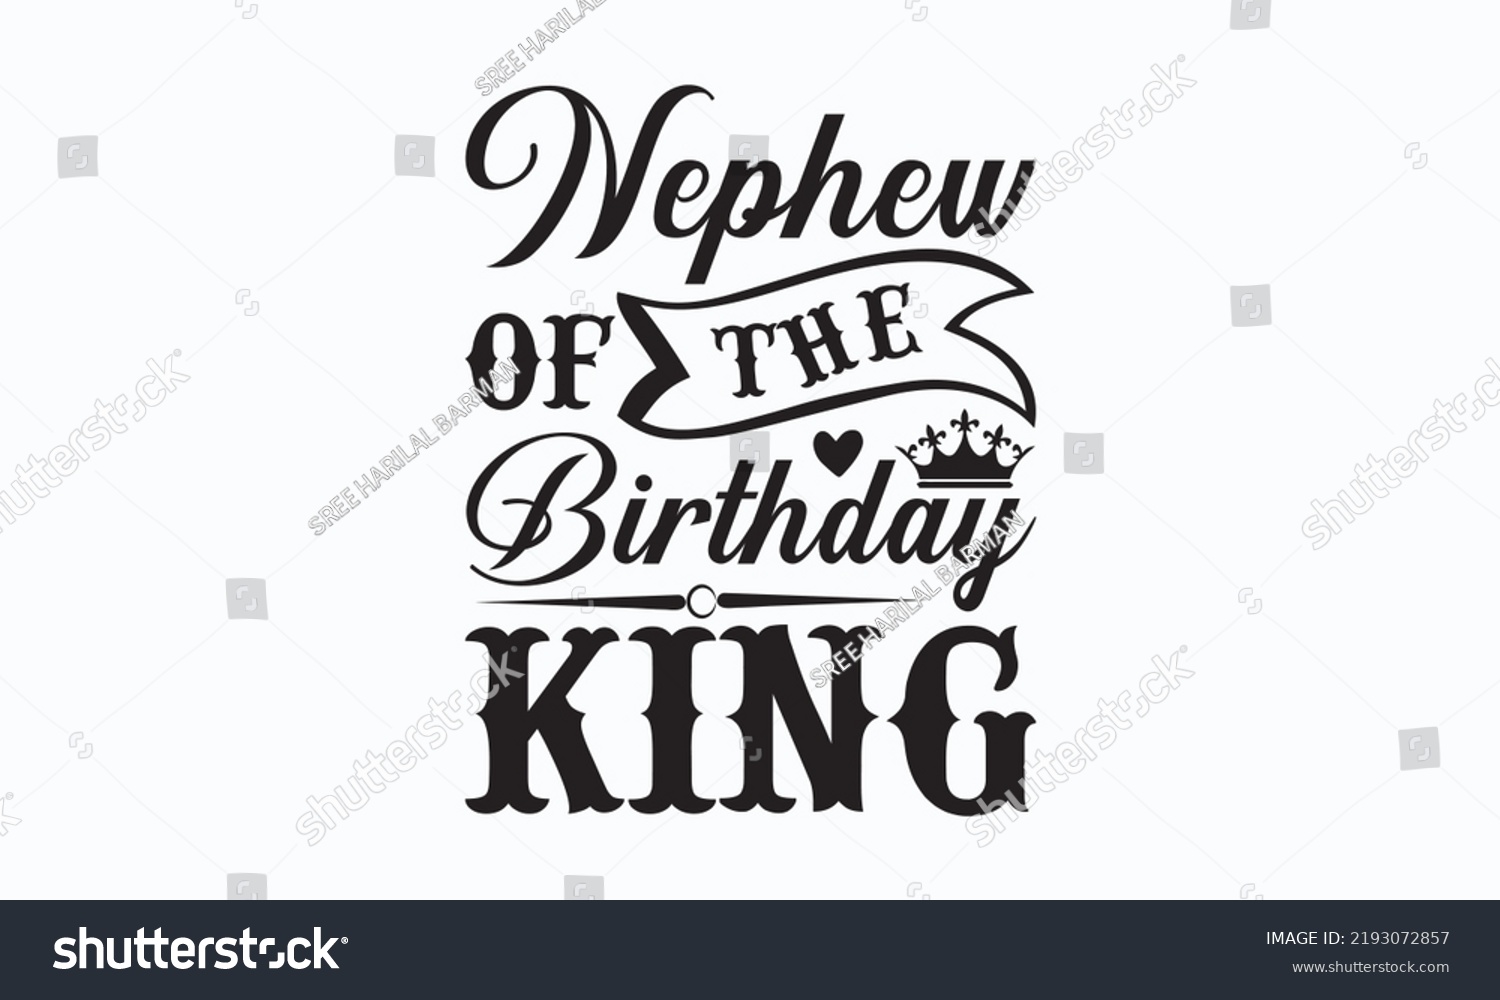 SVG of Nephew of the birthday king - Birthday SVG Digest typographic vector design for greeting cards, Birthday cards, Good for scrapbooking, posters, templet, textiles, gifts, and wedding sets, design.  svg